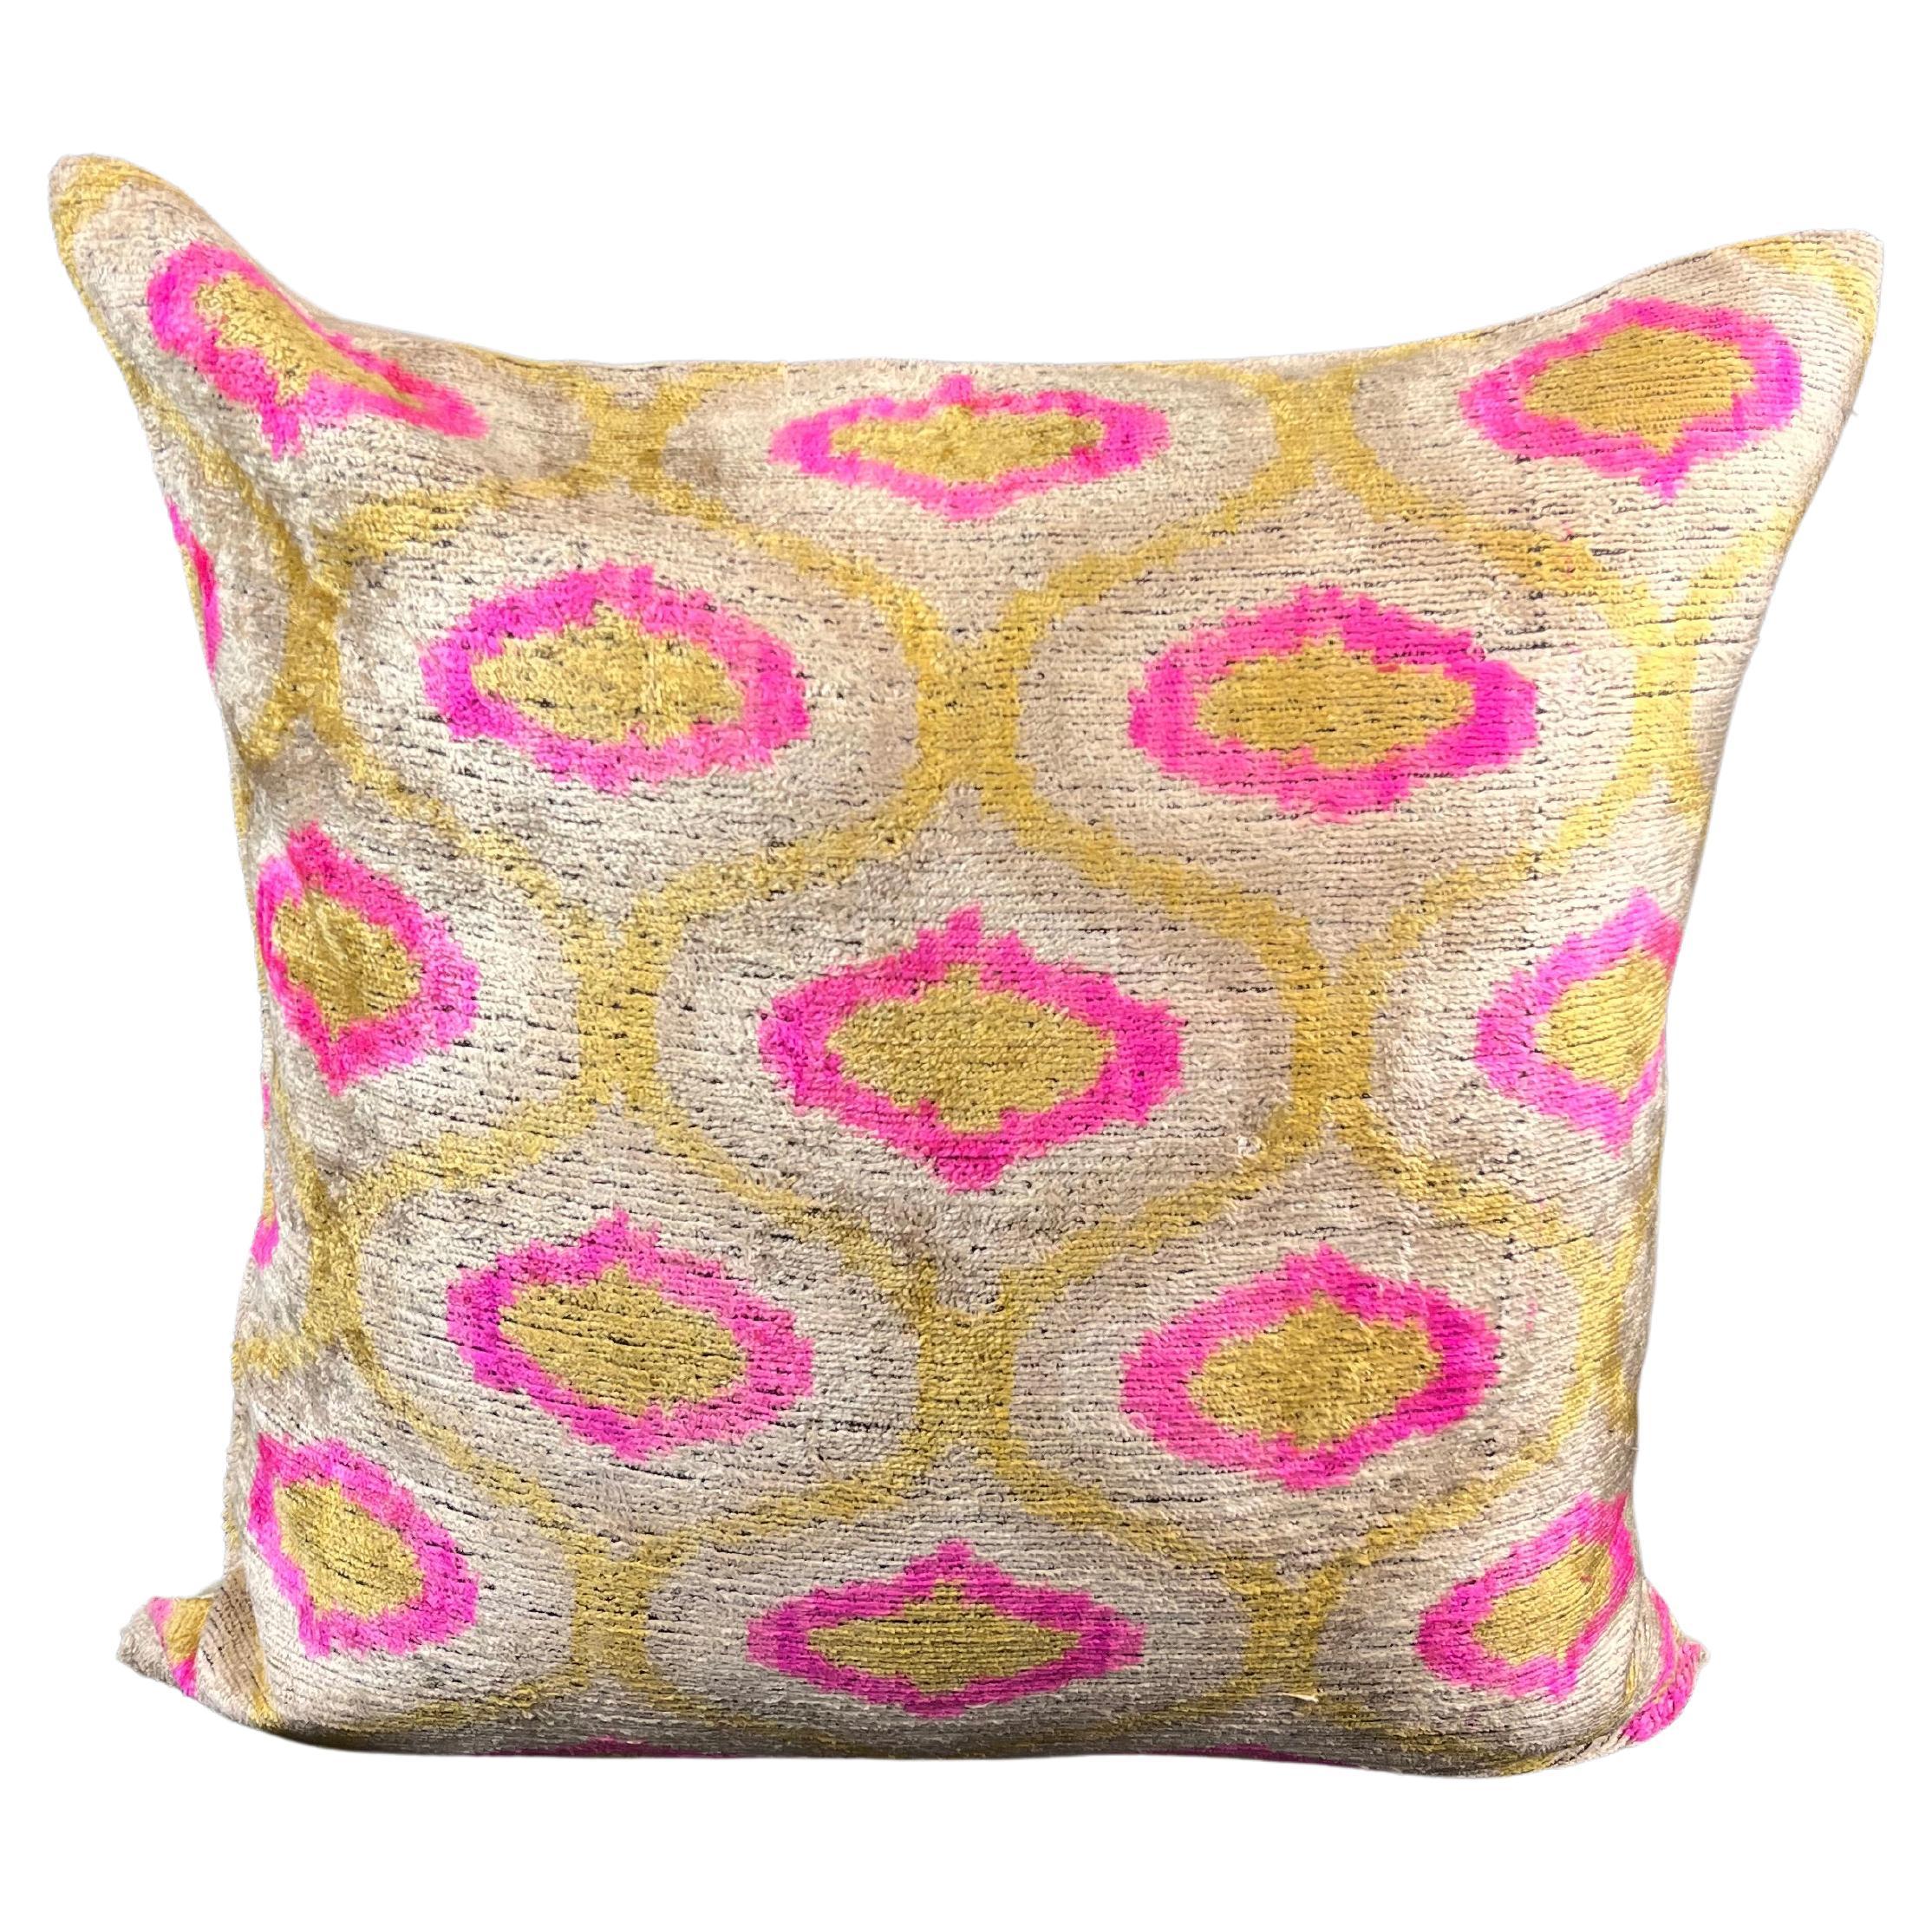 Pink and Golden Yellow Velvet Silk Ikat Pillow Cover For Sale